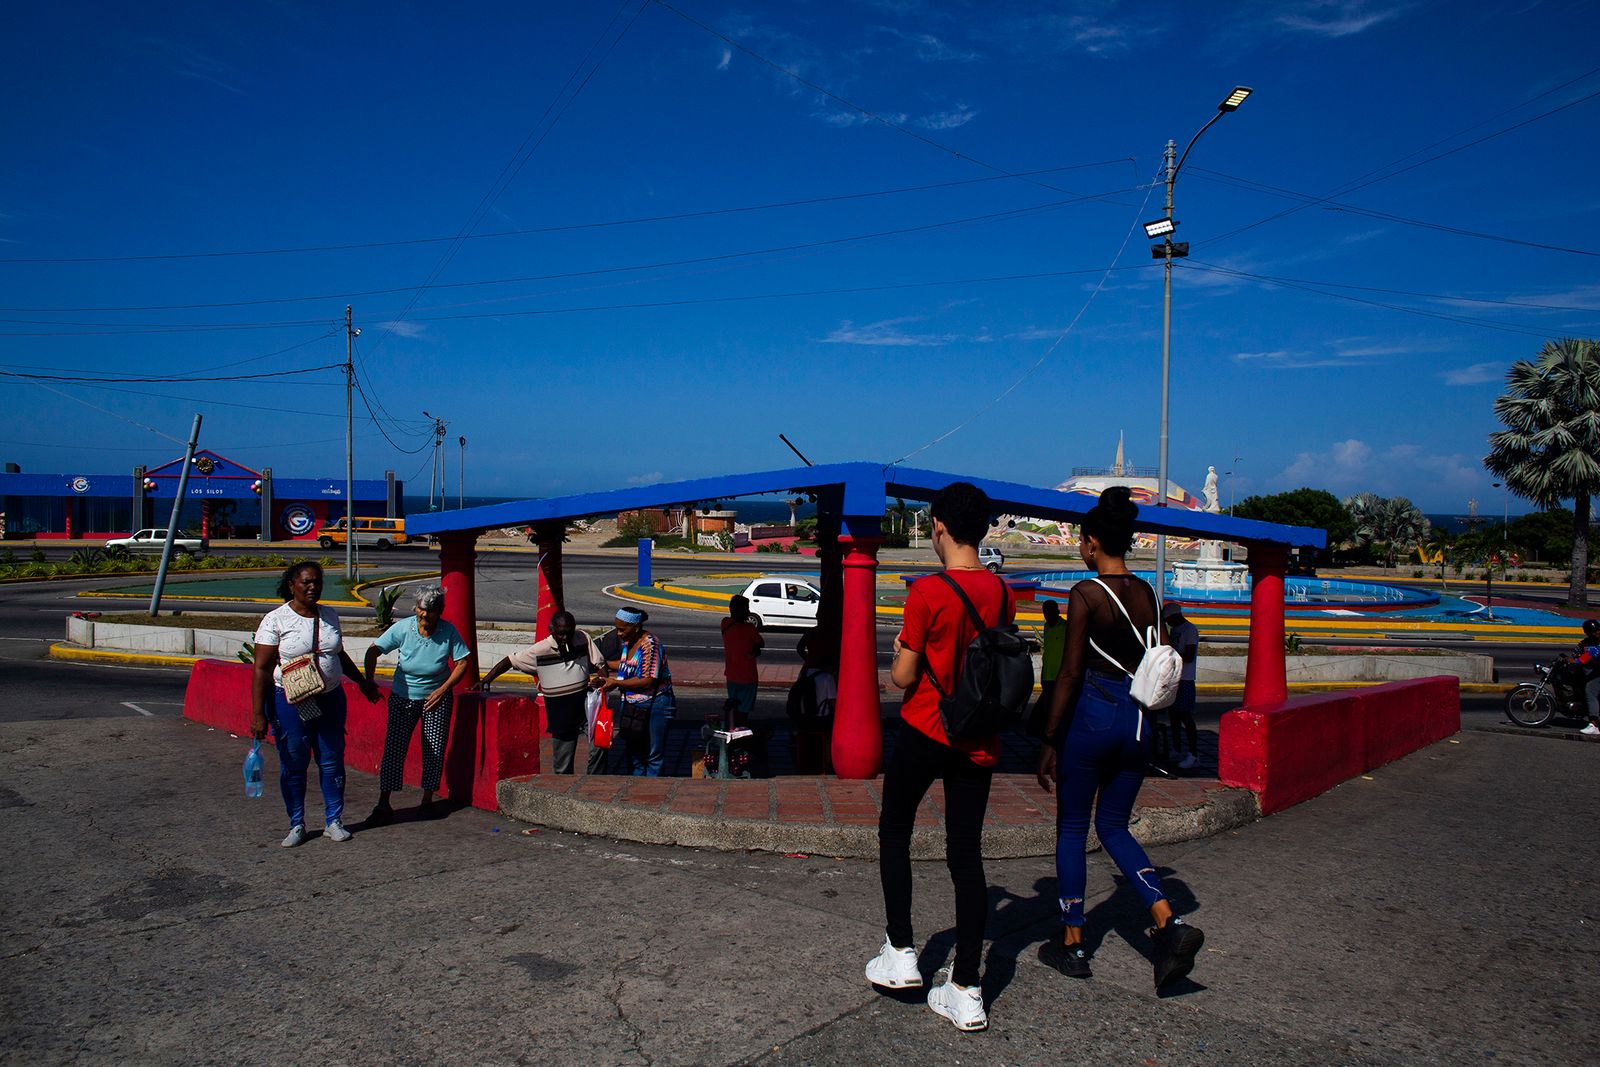 © Freisy González Portales - People walking through the Los silos bus stop. One of the bus stops near the old town of La Guaira, in the Soublette Avenue